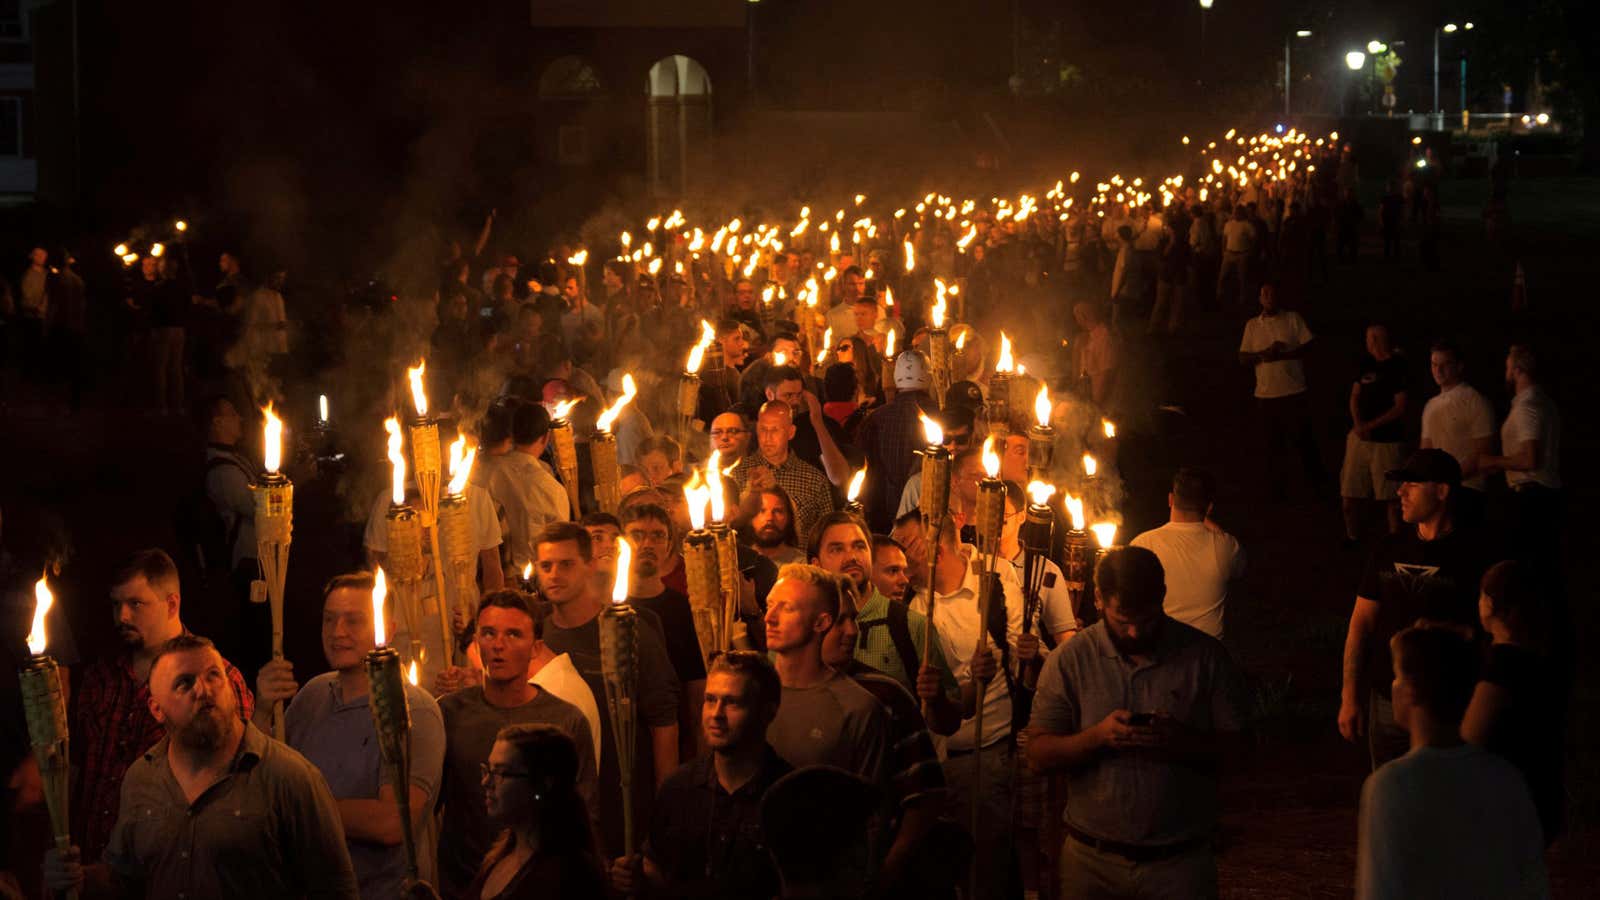 Tiki torches on the march.